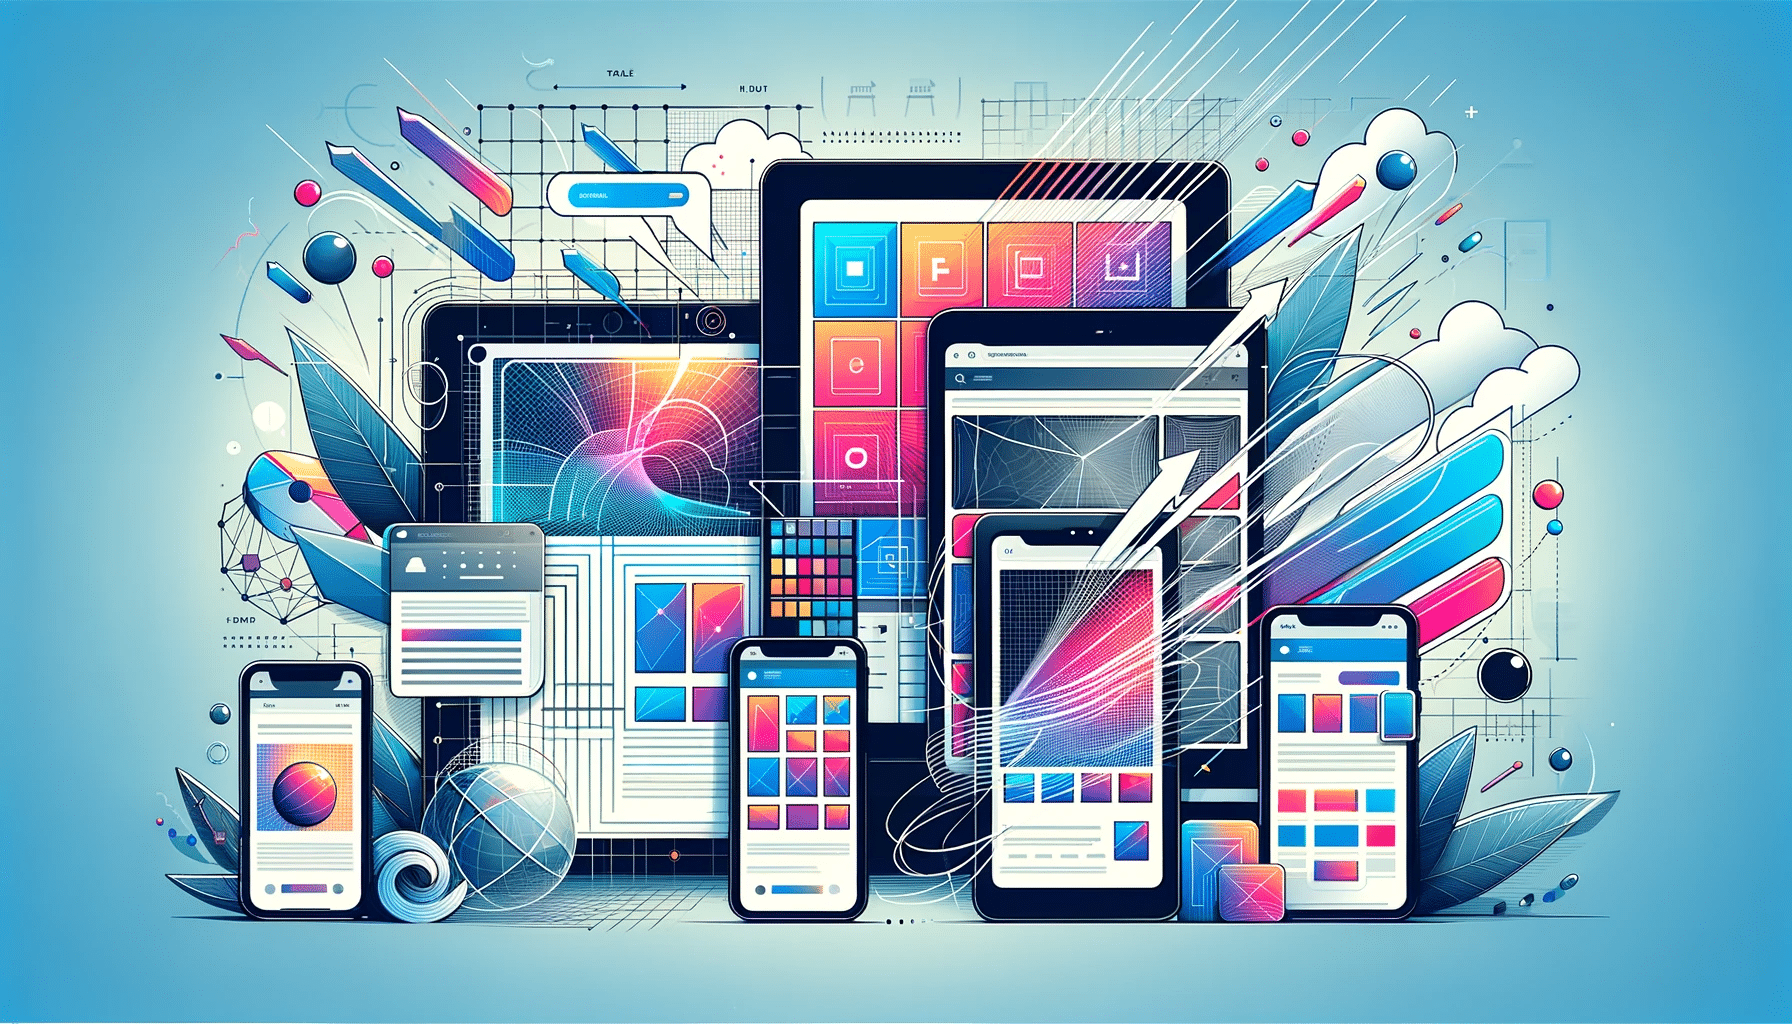 A vibrant digital illustration displaying a range of devices with screens, abstract icons, and dynamic lines symbolizing interconnected technology and modern communication.